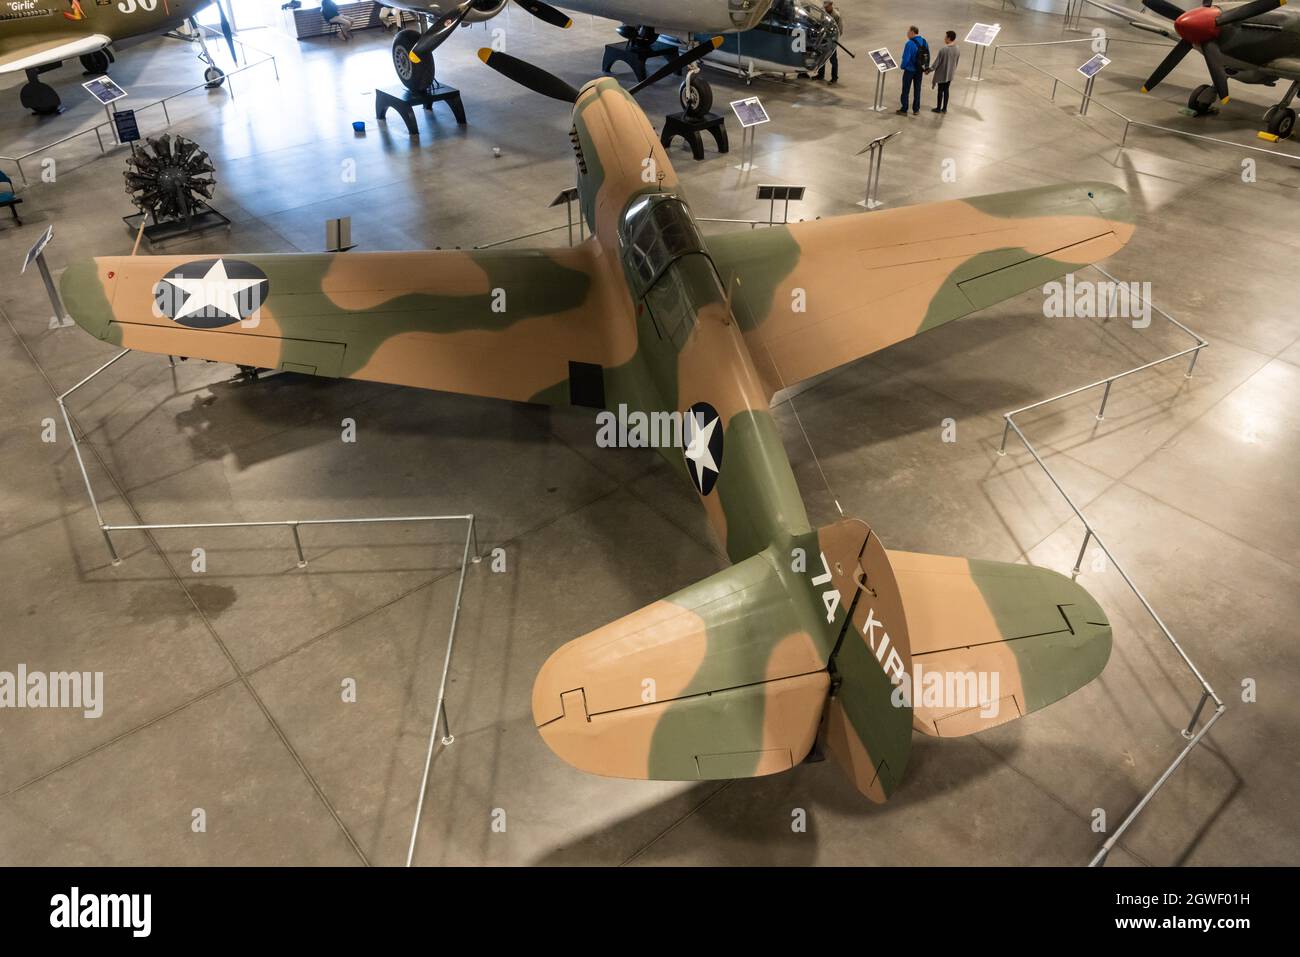 A Curtiss P-40E Warhawk U.S. Army Air Forces multi-role fighter in World War II.  Pima Air & Space Museum, Tucson, Arizona. Stock Photo